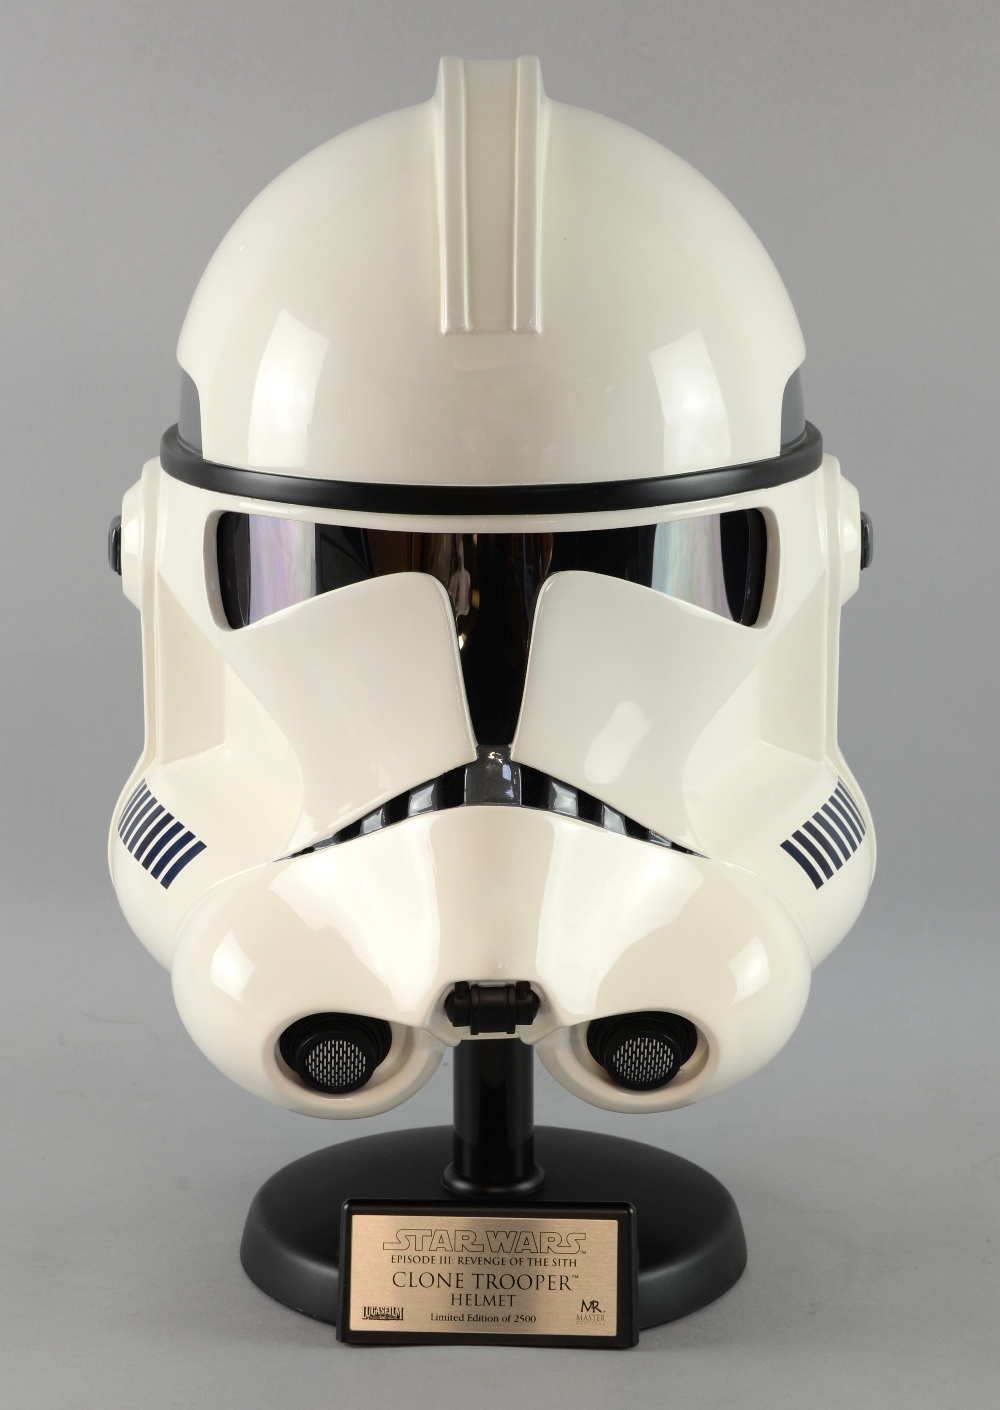 Star Wars - Master Replicas Episode III; Revenge of the Sith Clone Trooper Helmet, Limited Edition - Image 5 of 6